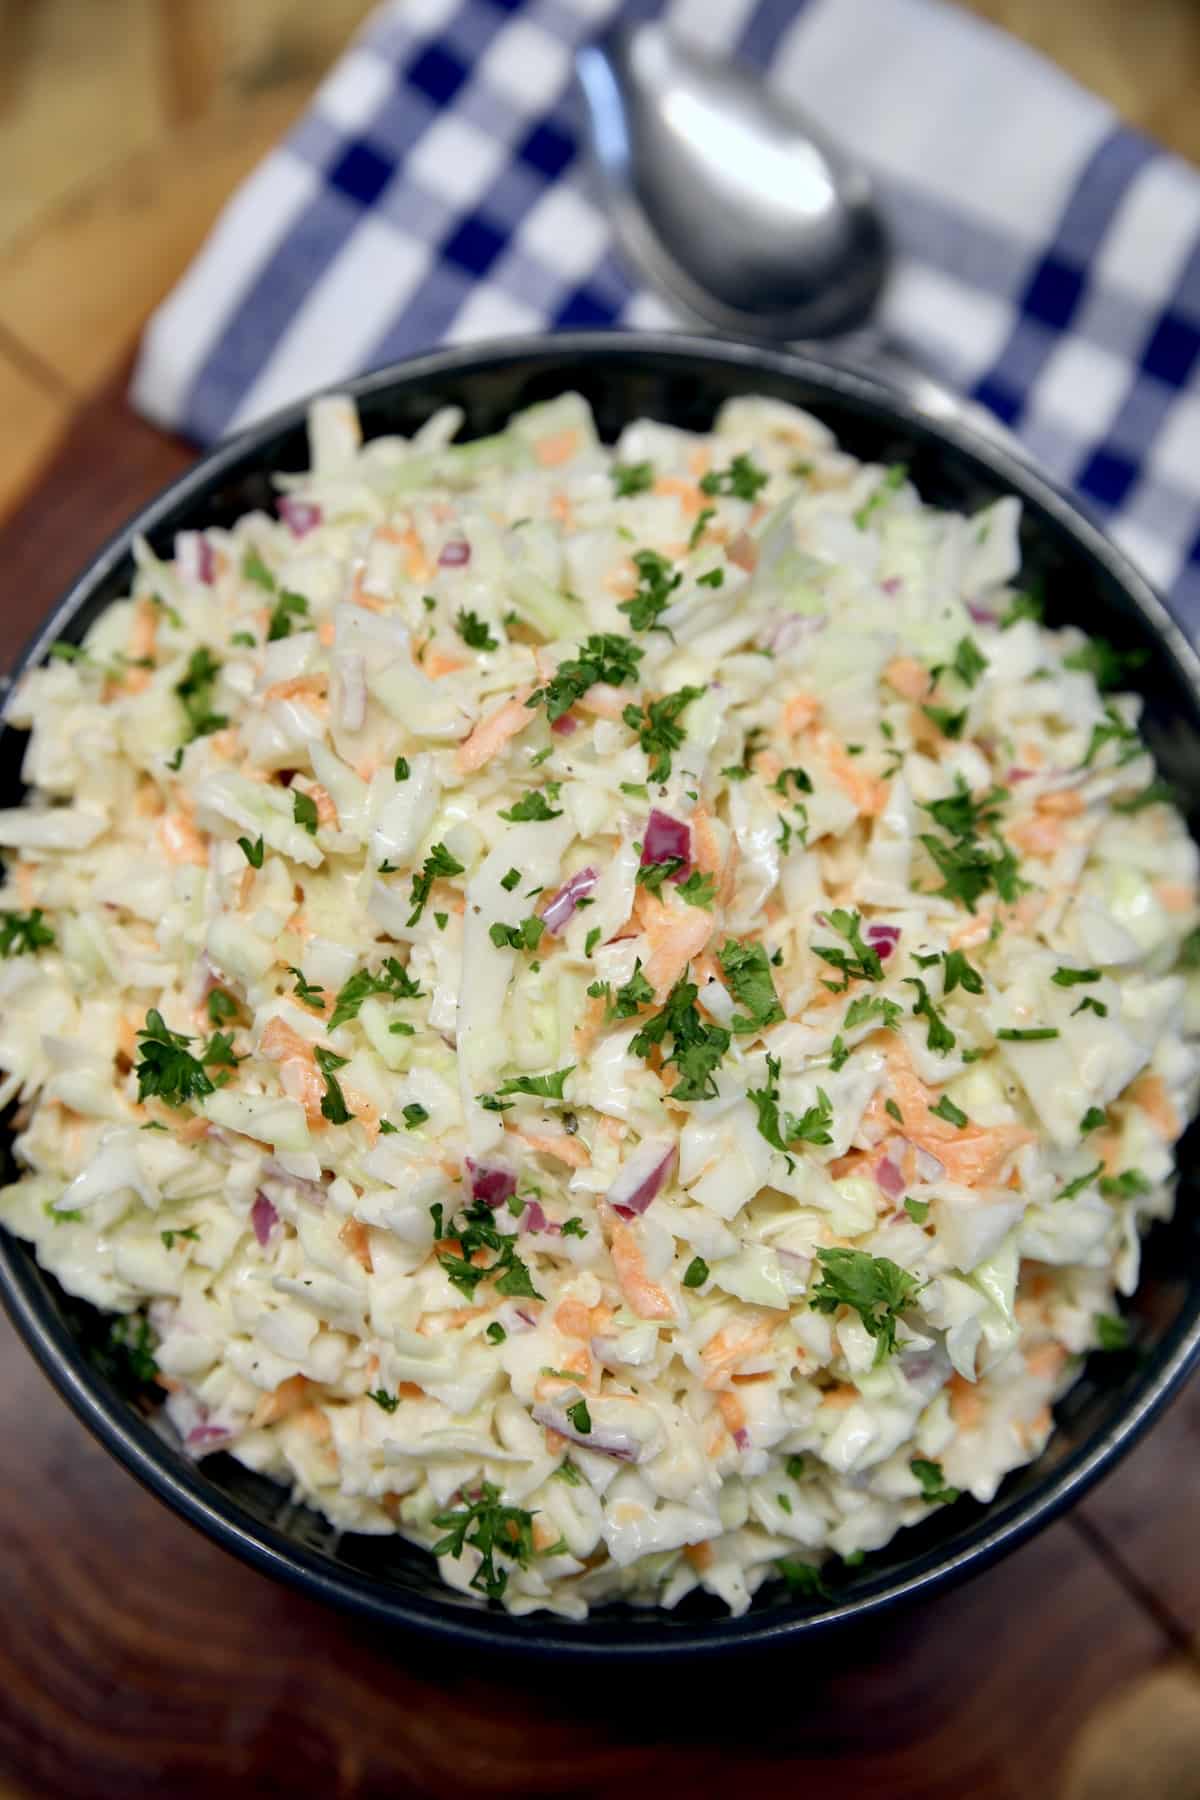 Bowl of coleslaw with red onion on a blue and white towel.